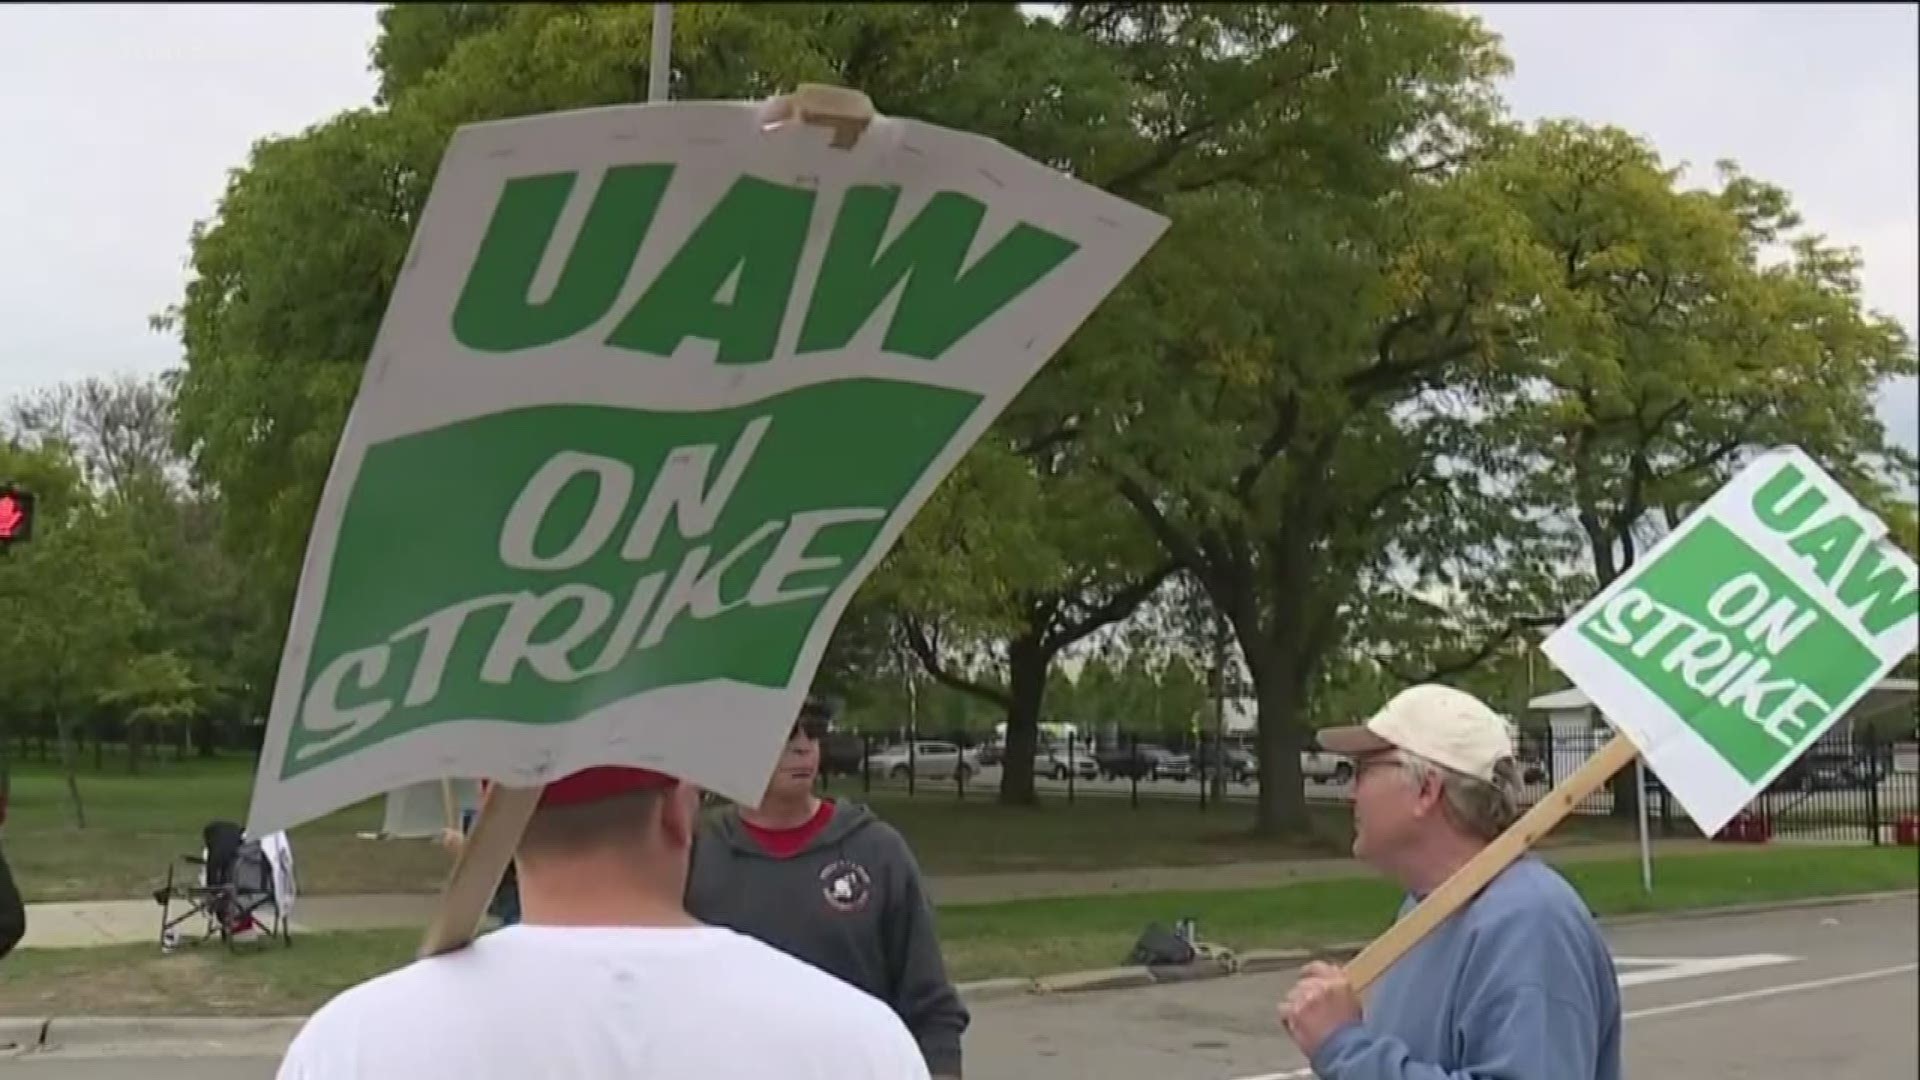 General Motors CEO Mary Barra joined negotiators at the bargaining table, an indication that a deal may be near to end a monthlong strike by members the UAW.